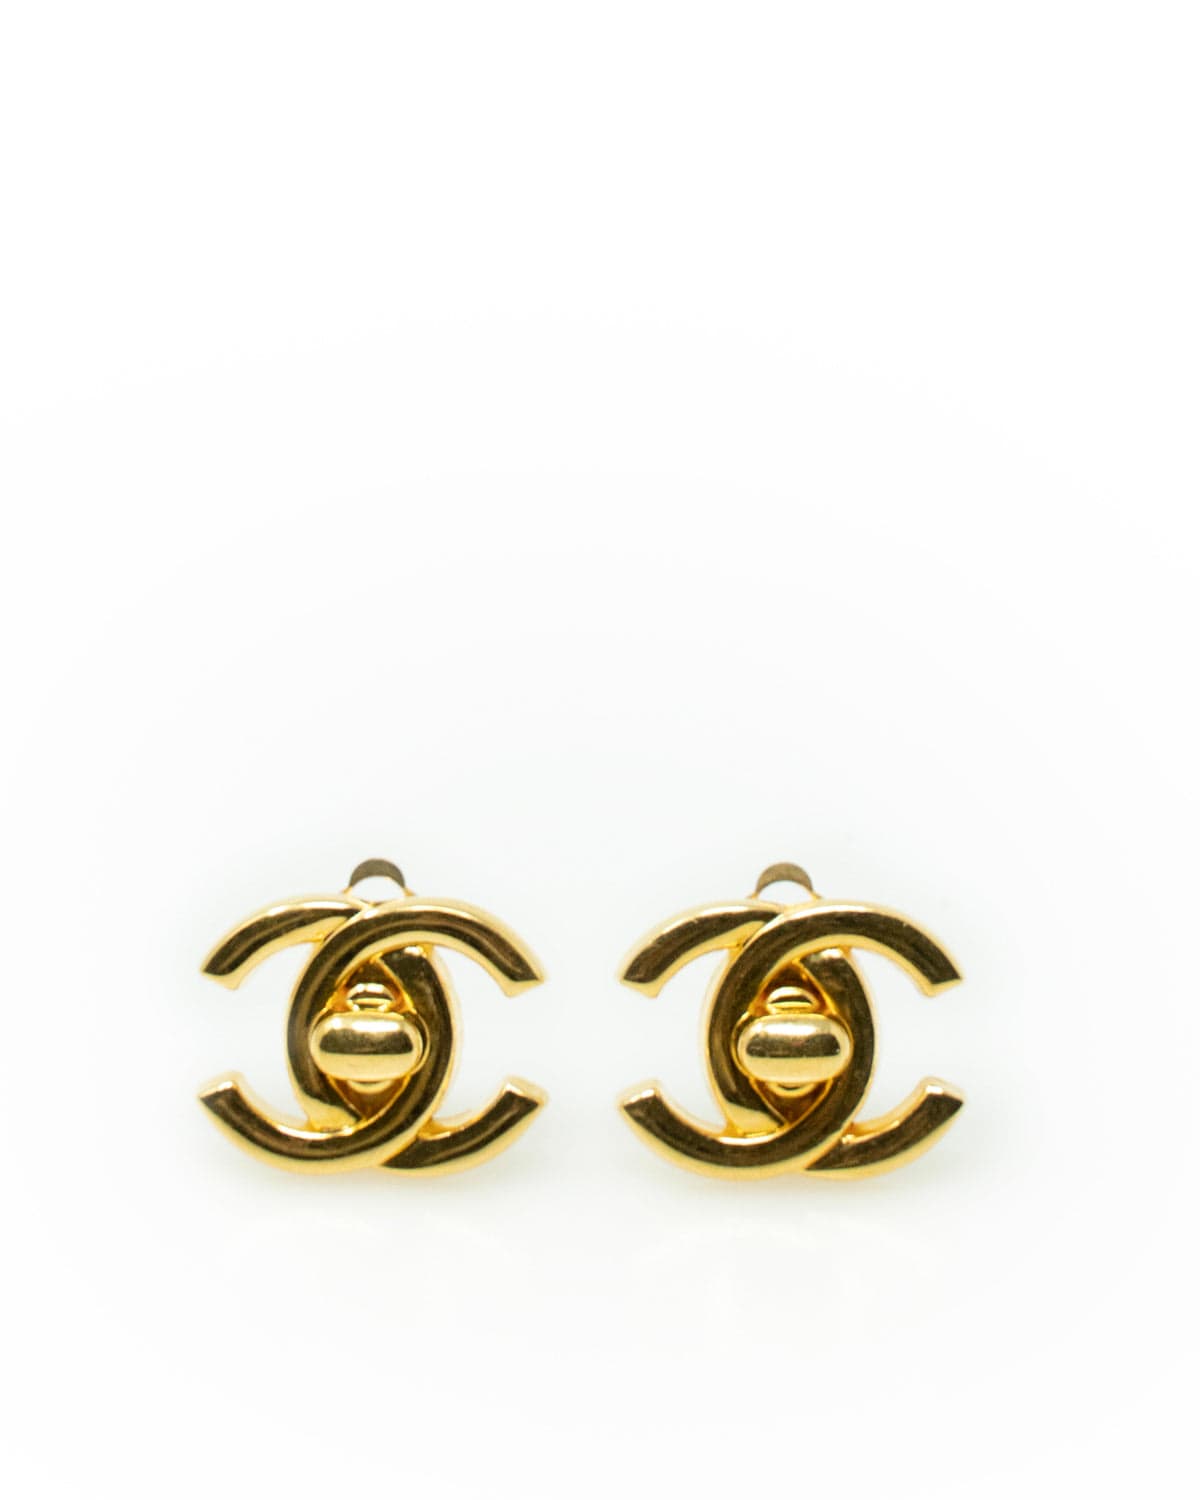 RvceShops Revival - on Earrings  Gold Chanel CC Clip - Chanel Pre